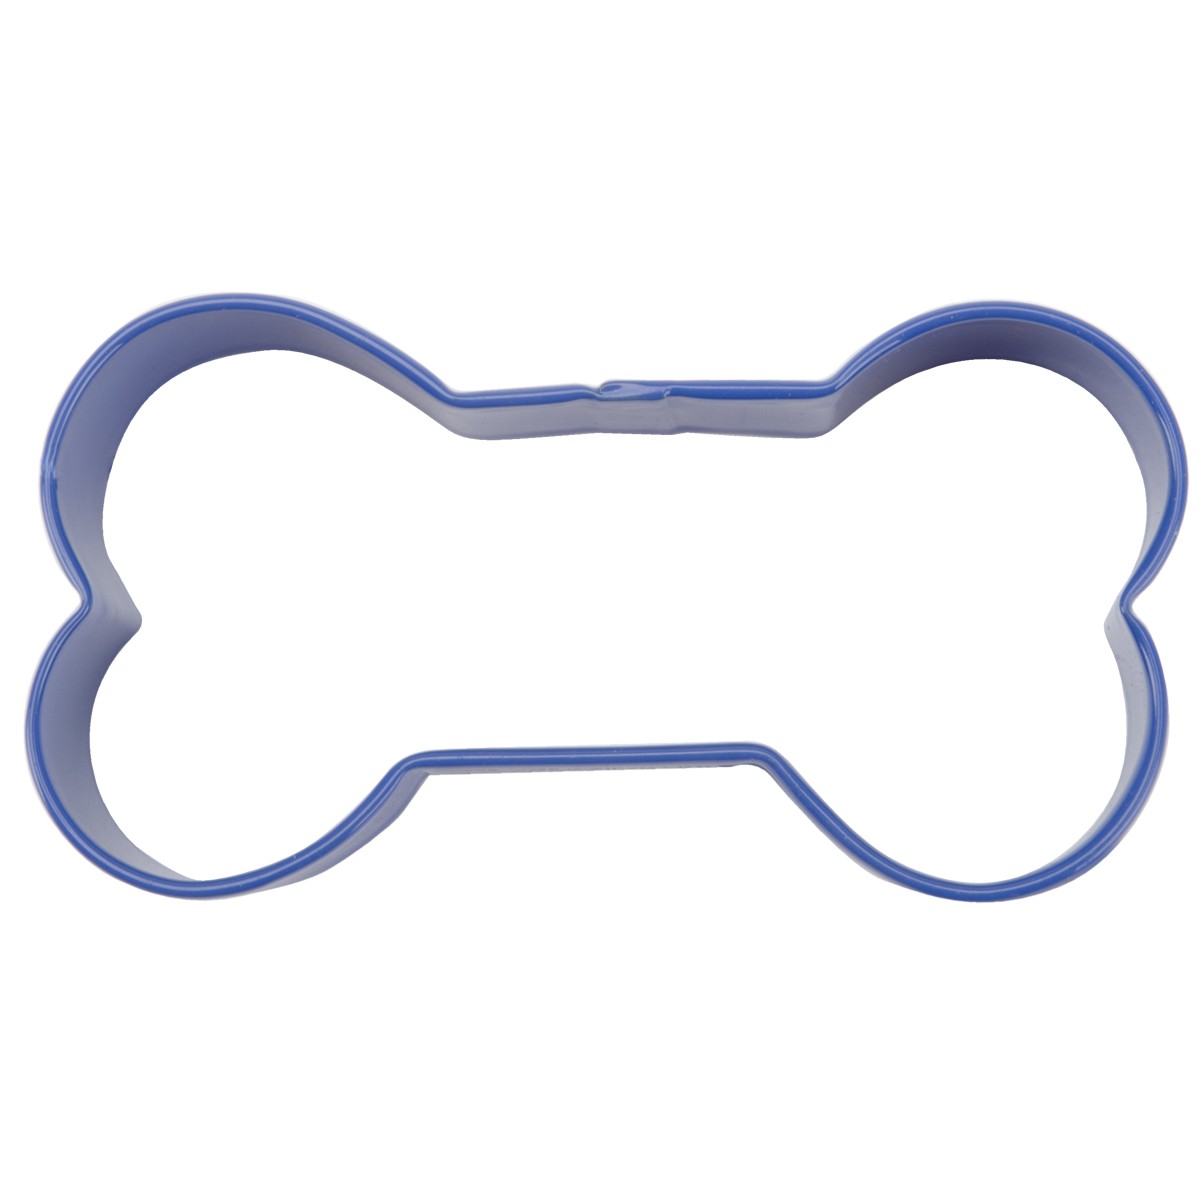 Dog bone clip art free vector free vector for free download about